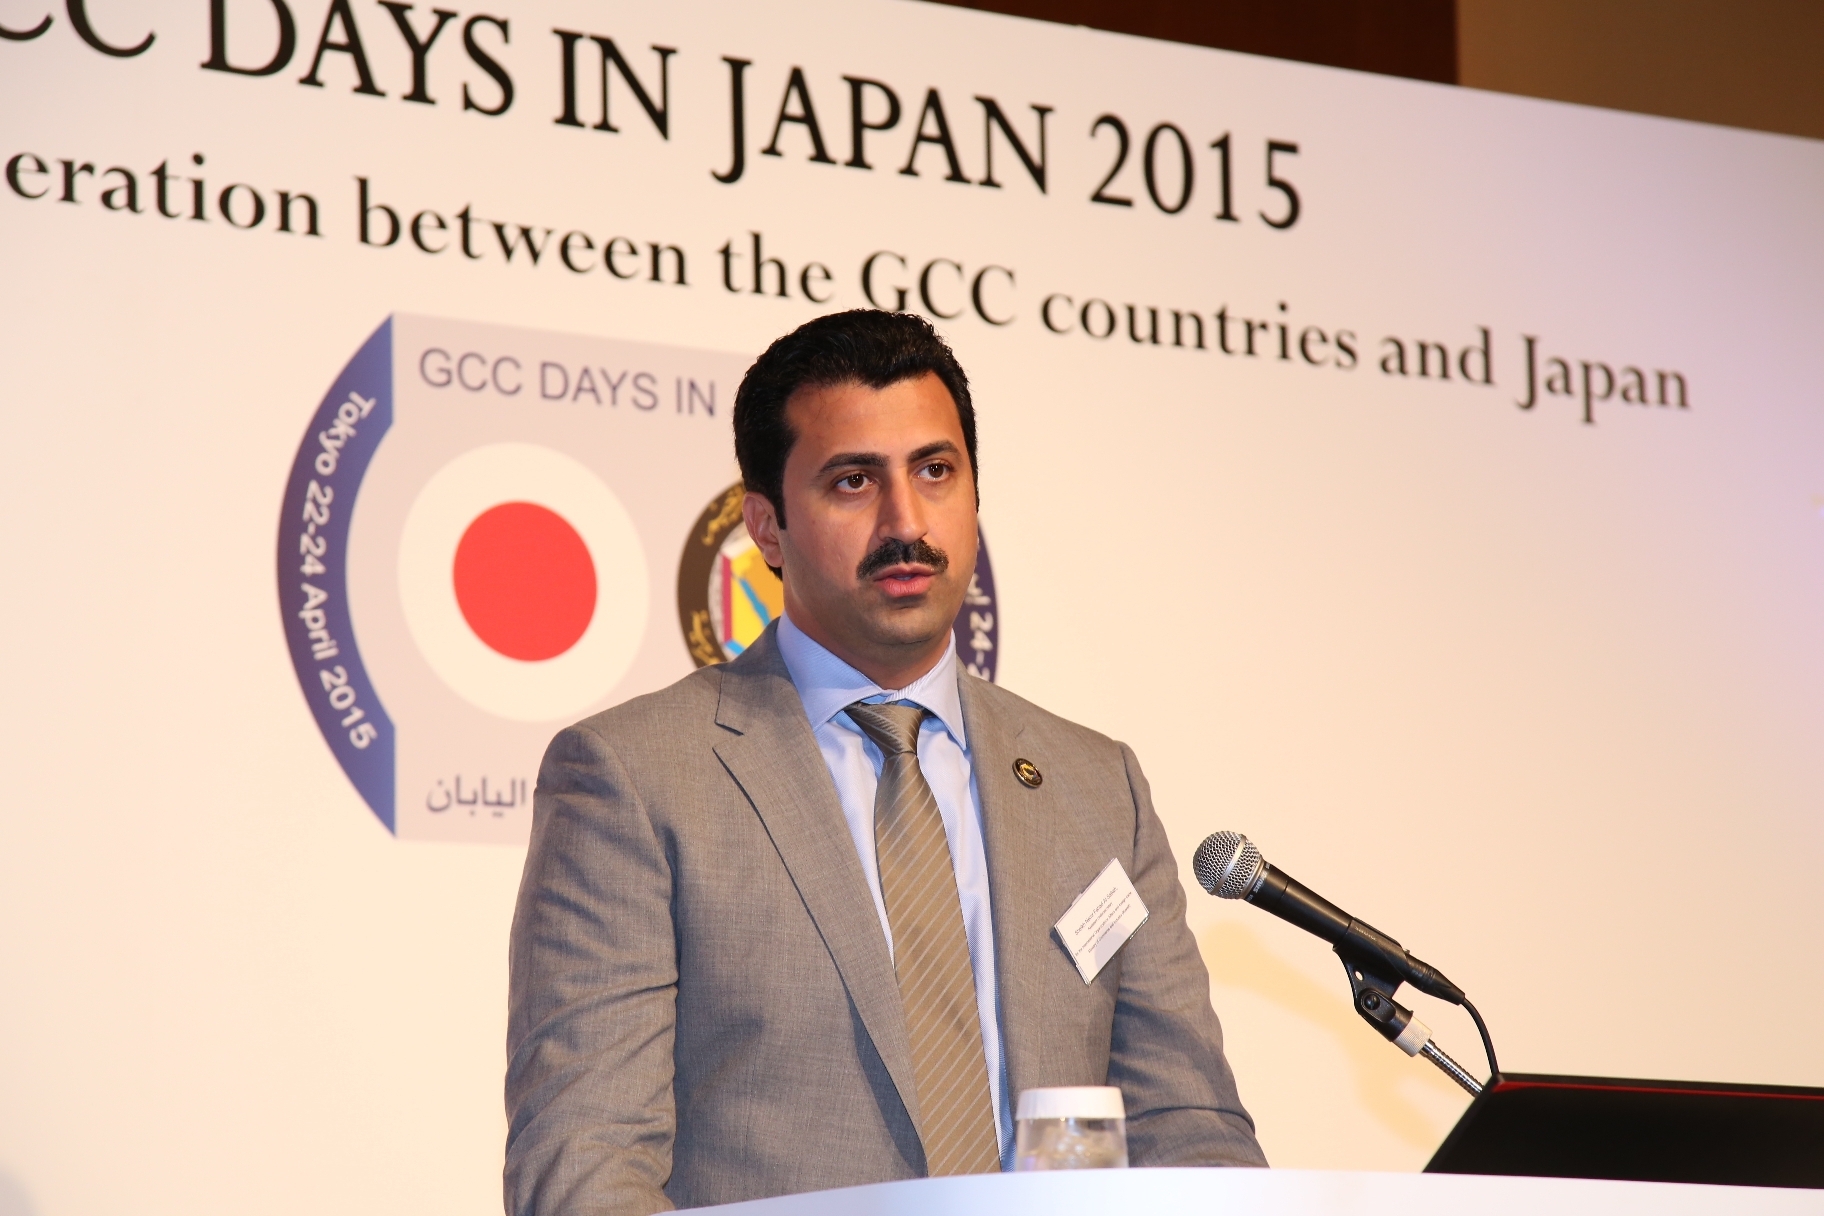 Head of Kuwaiti delegation to the "GCC Days in Japan" event Ministry of Commerce and Industry Assistant Undersecretary for International Organizations and Foreign Trade Sheikh Nemer Fahad Al-Sabah